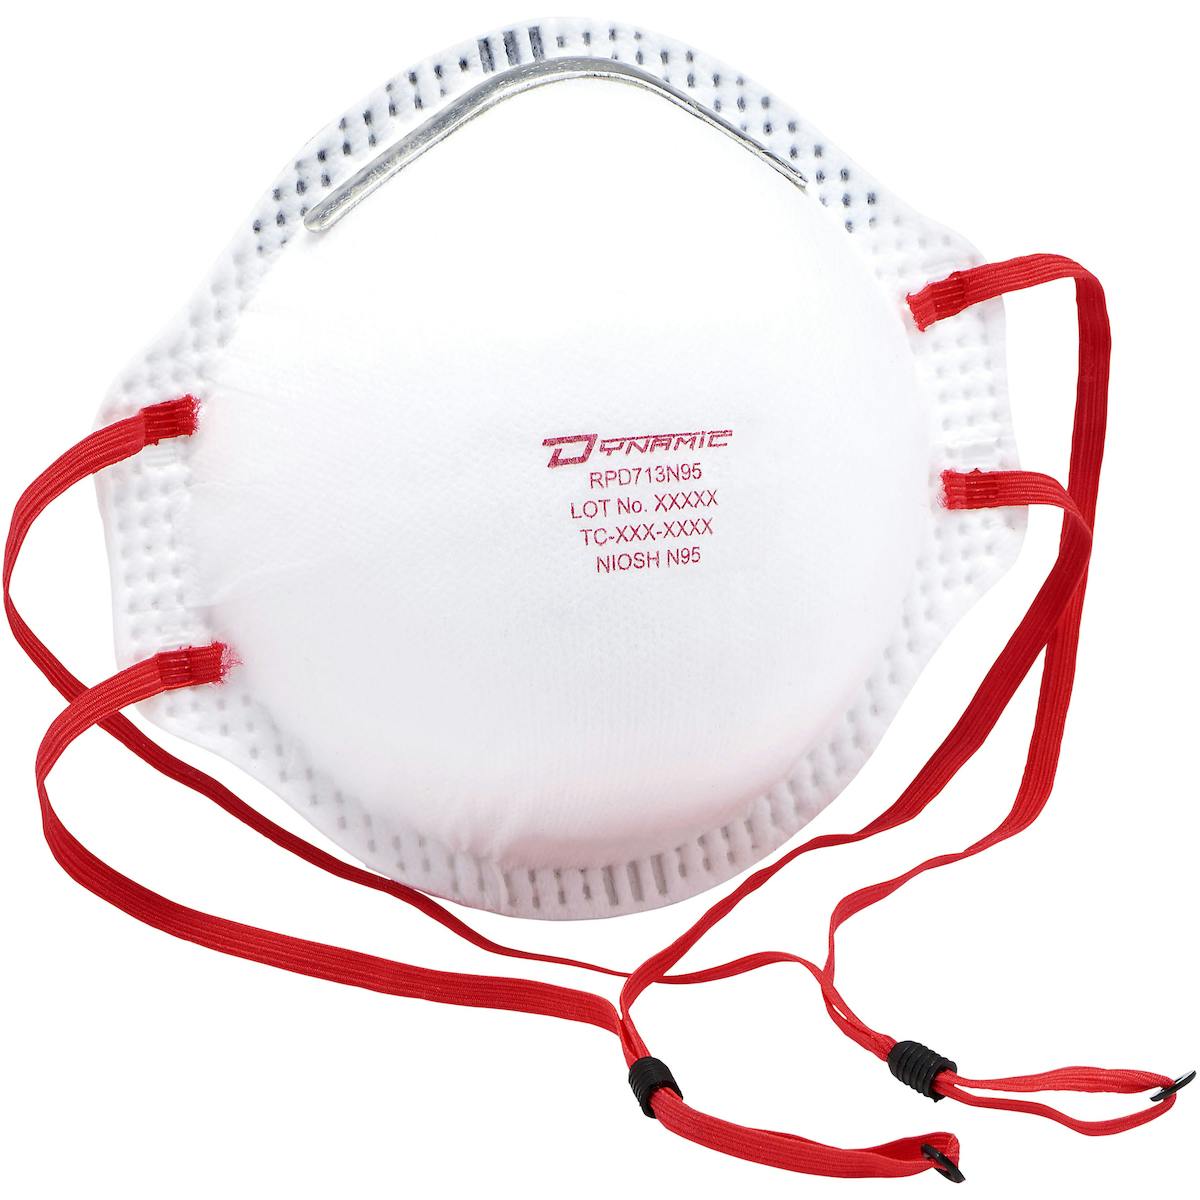 Deluxe N95 Disposable Respirator - 20 Pack, White (270-RPD713N95) - OS_2